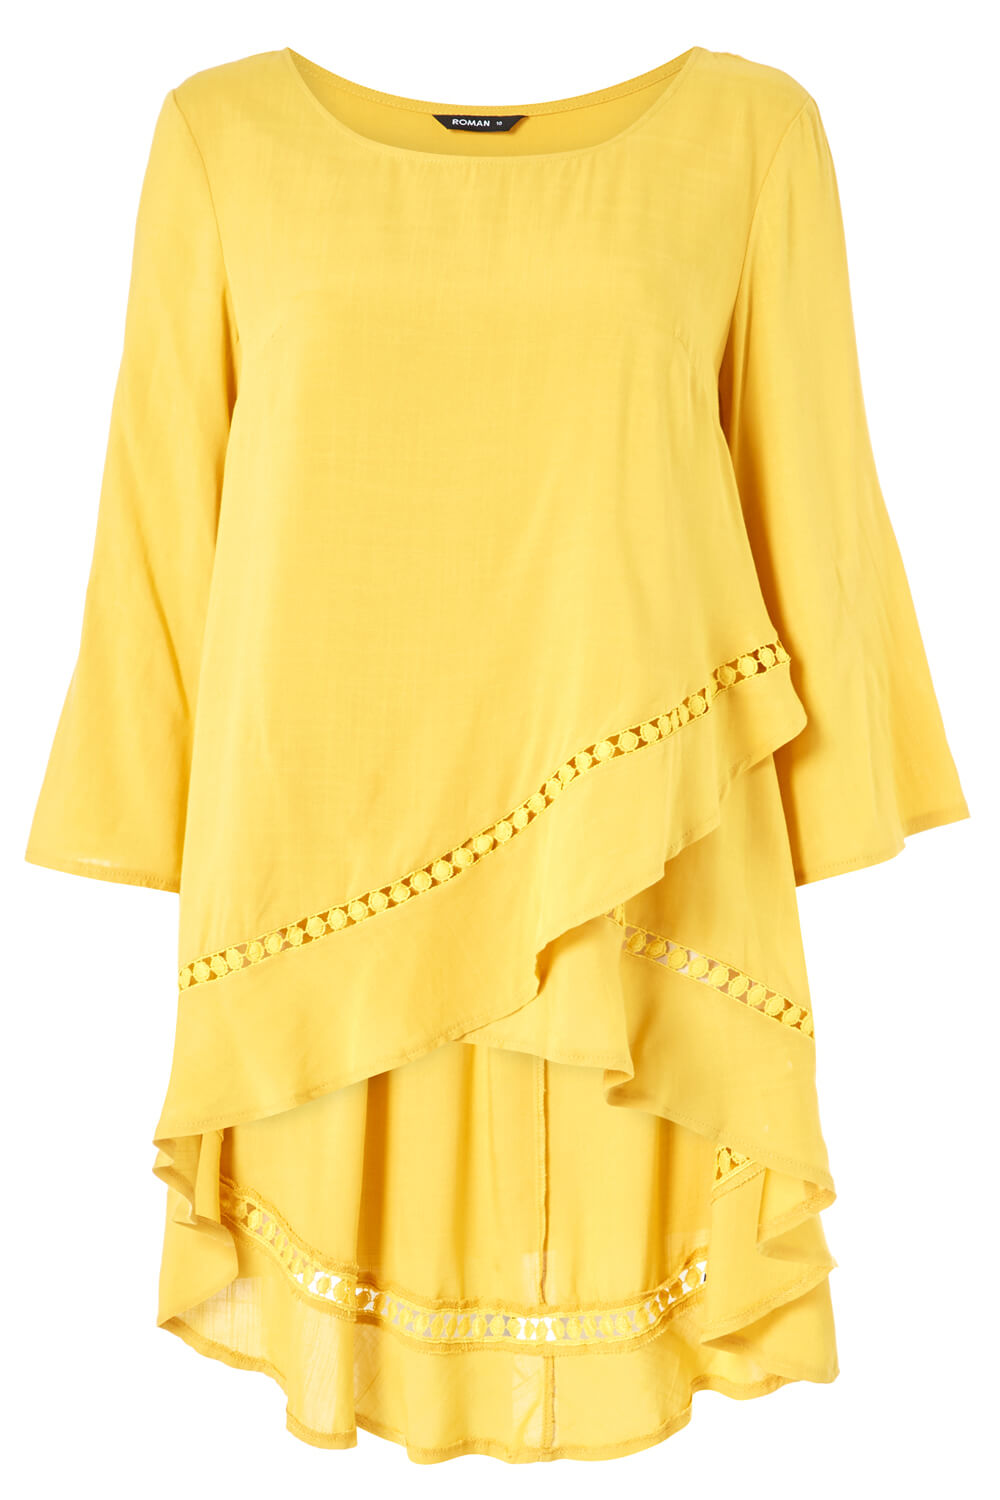 Bright Yellow Lace Dip Back Top, Image 5 of 5